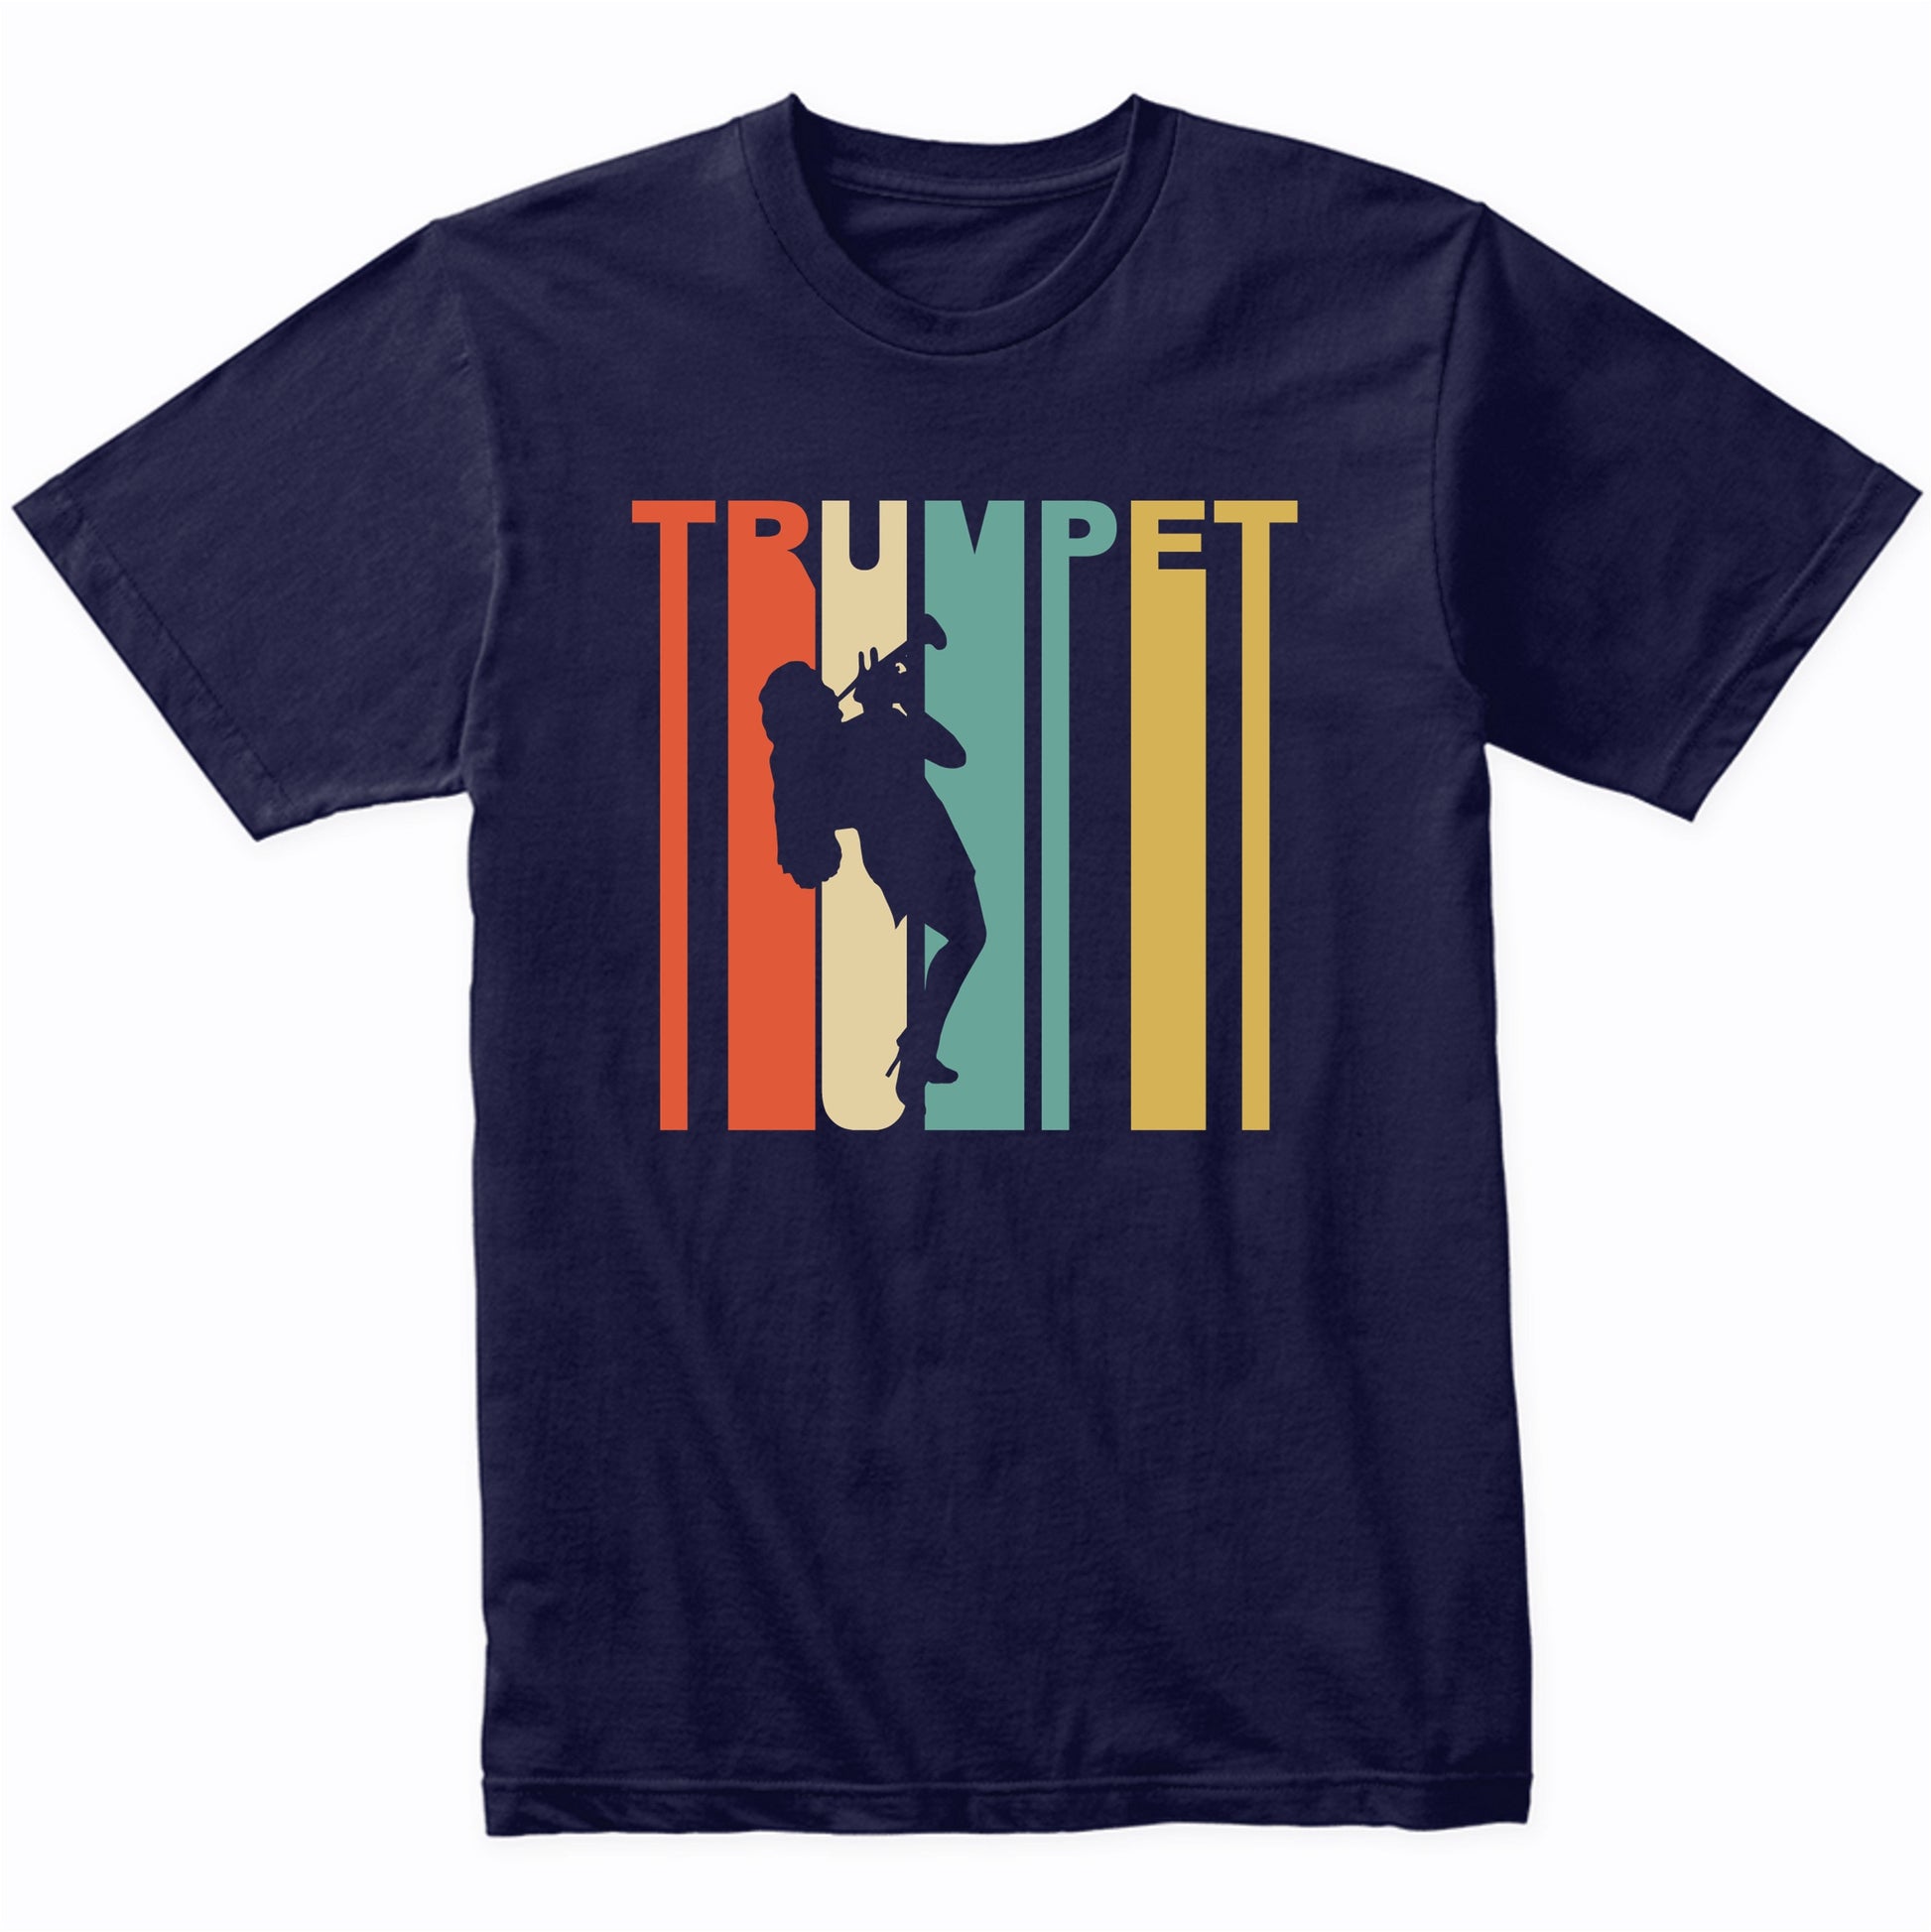 Retro 1970's Style Trumpet Player Silhouette Music T-Shirt